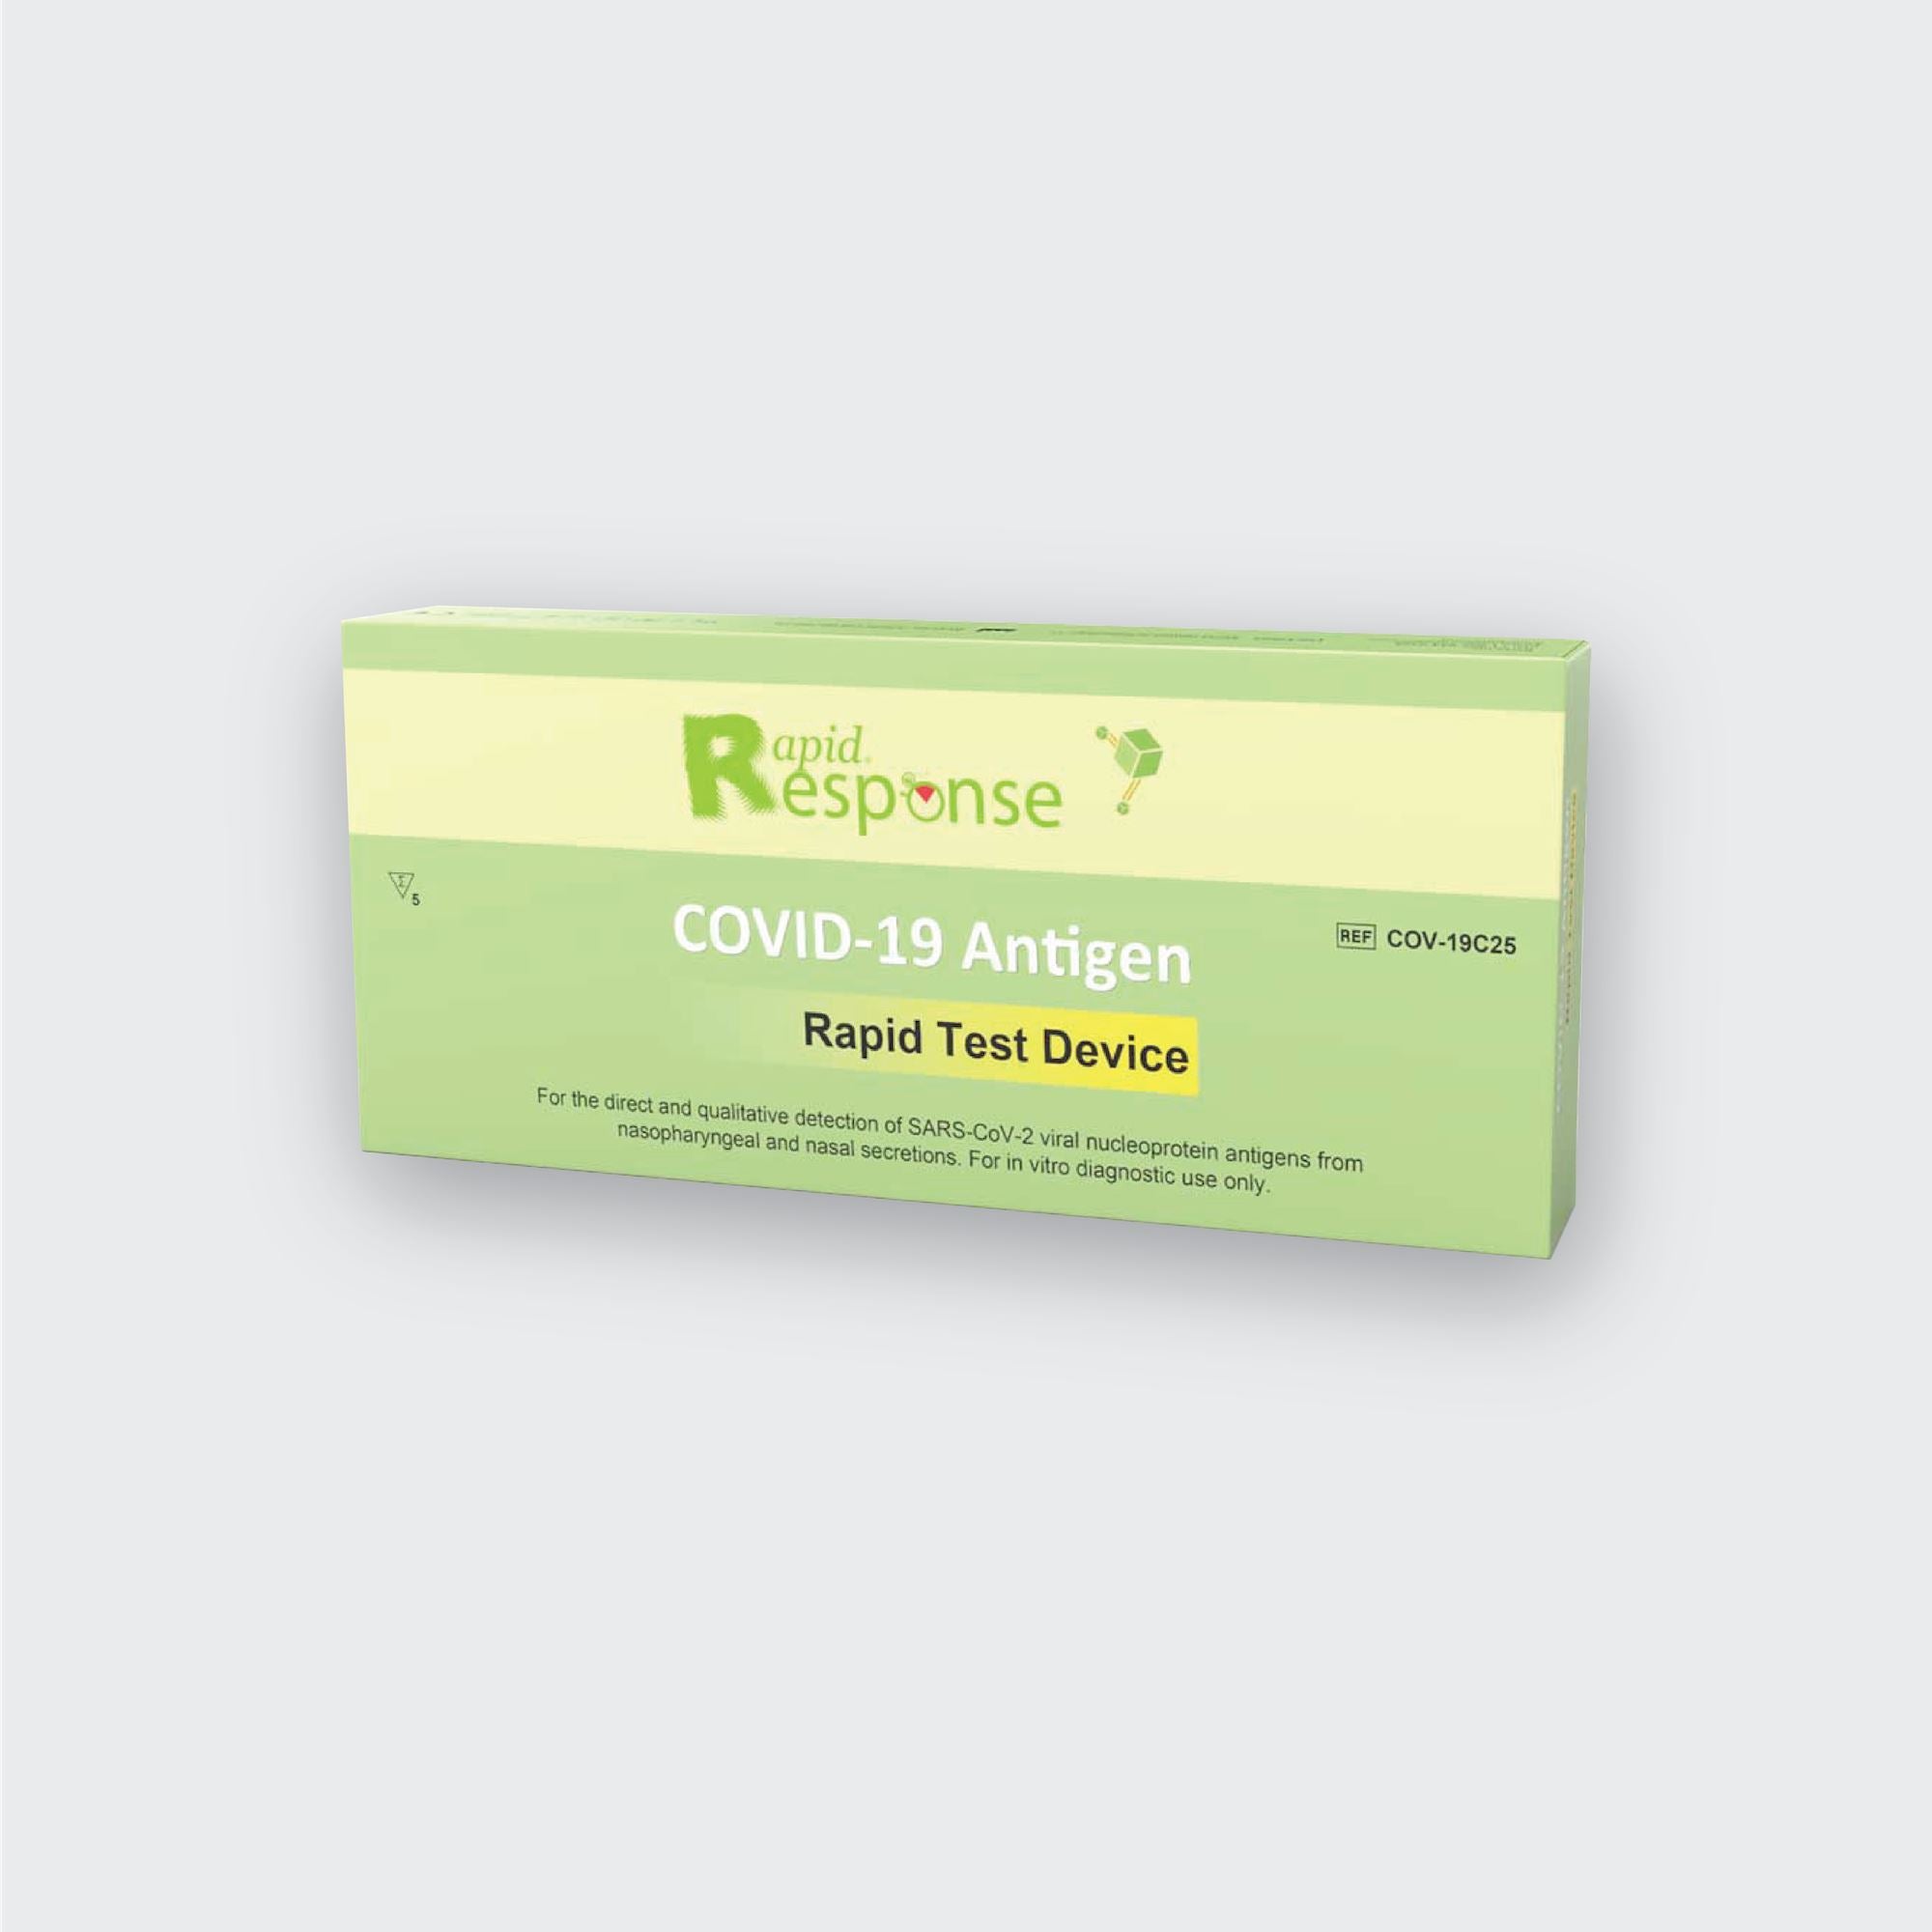 Affordable COVID-19 Antigen Testing Kits for Sale in Bulk - Get Quick and Accurate Results Online